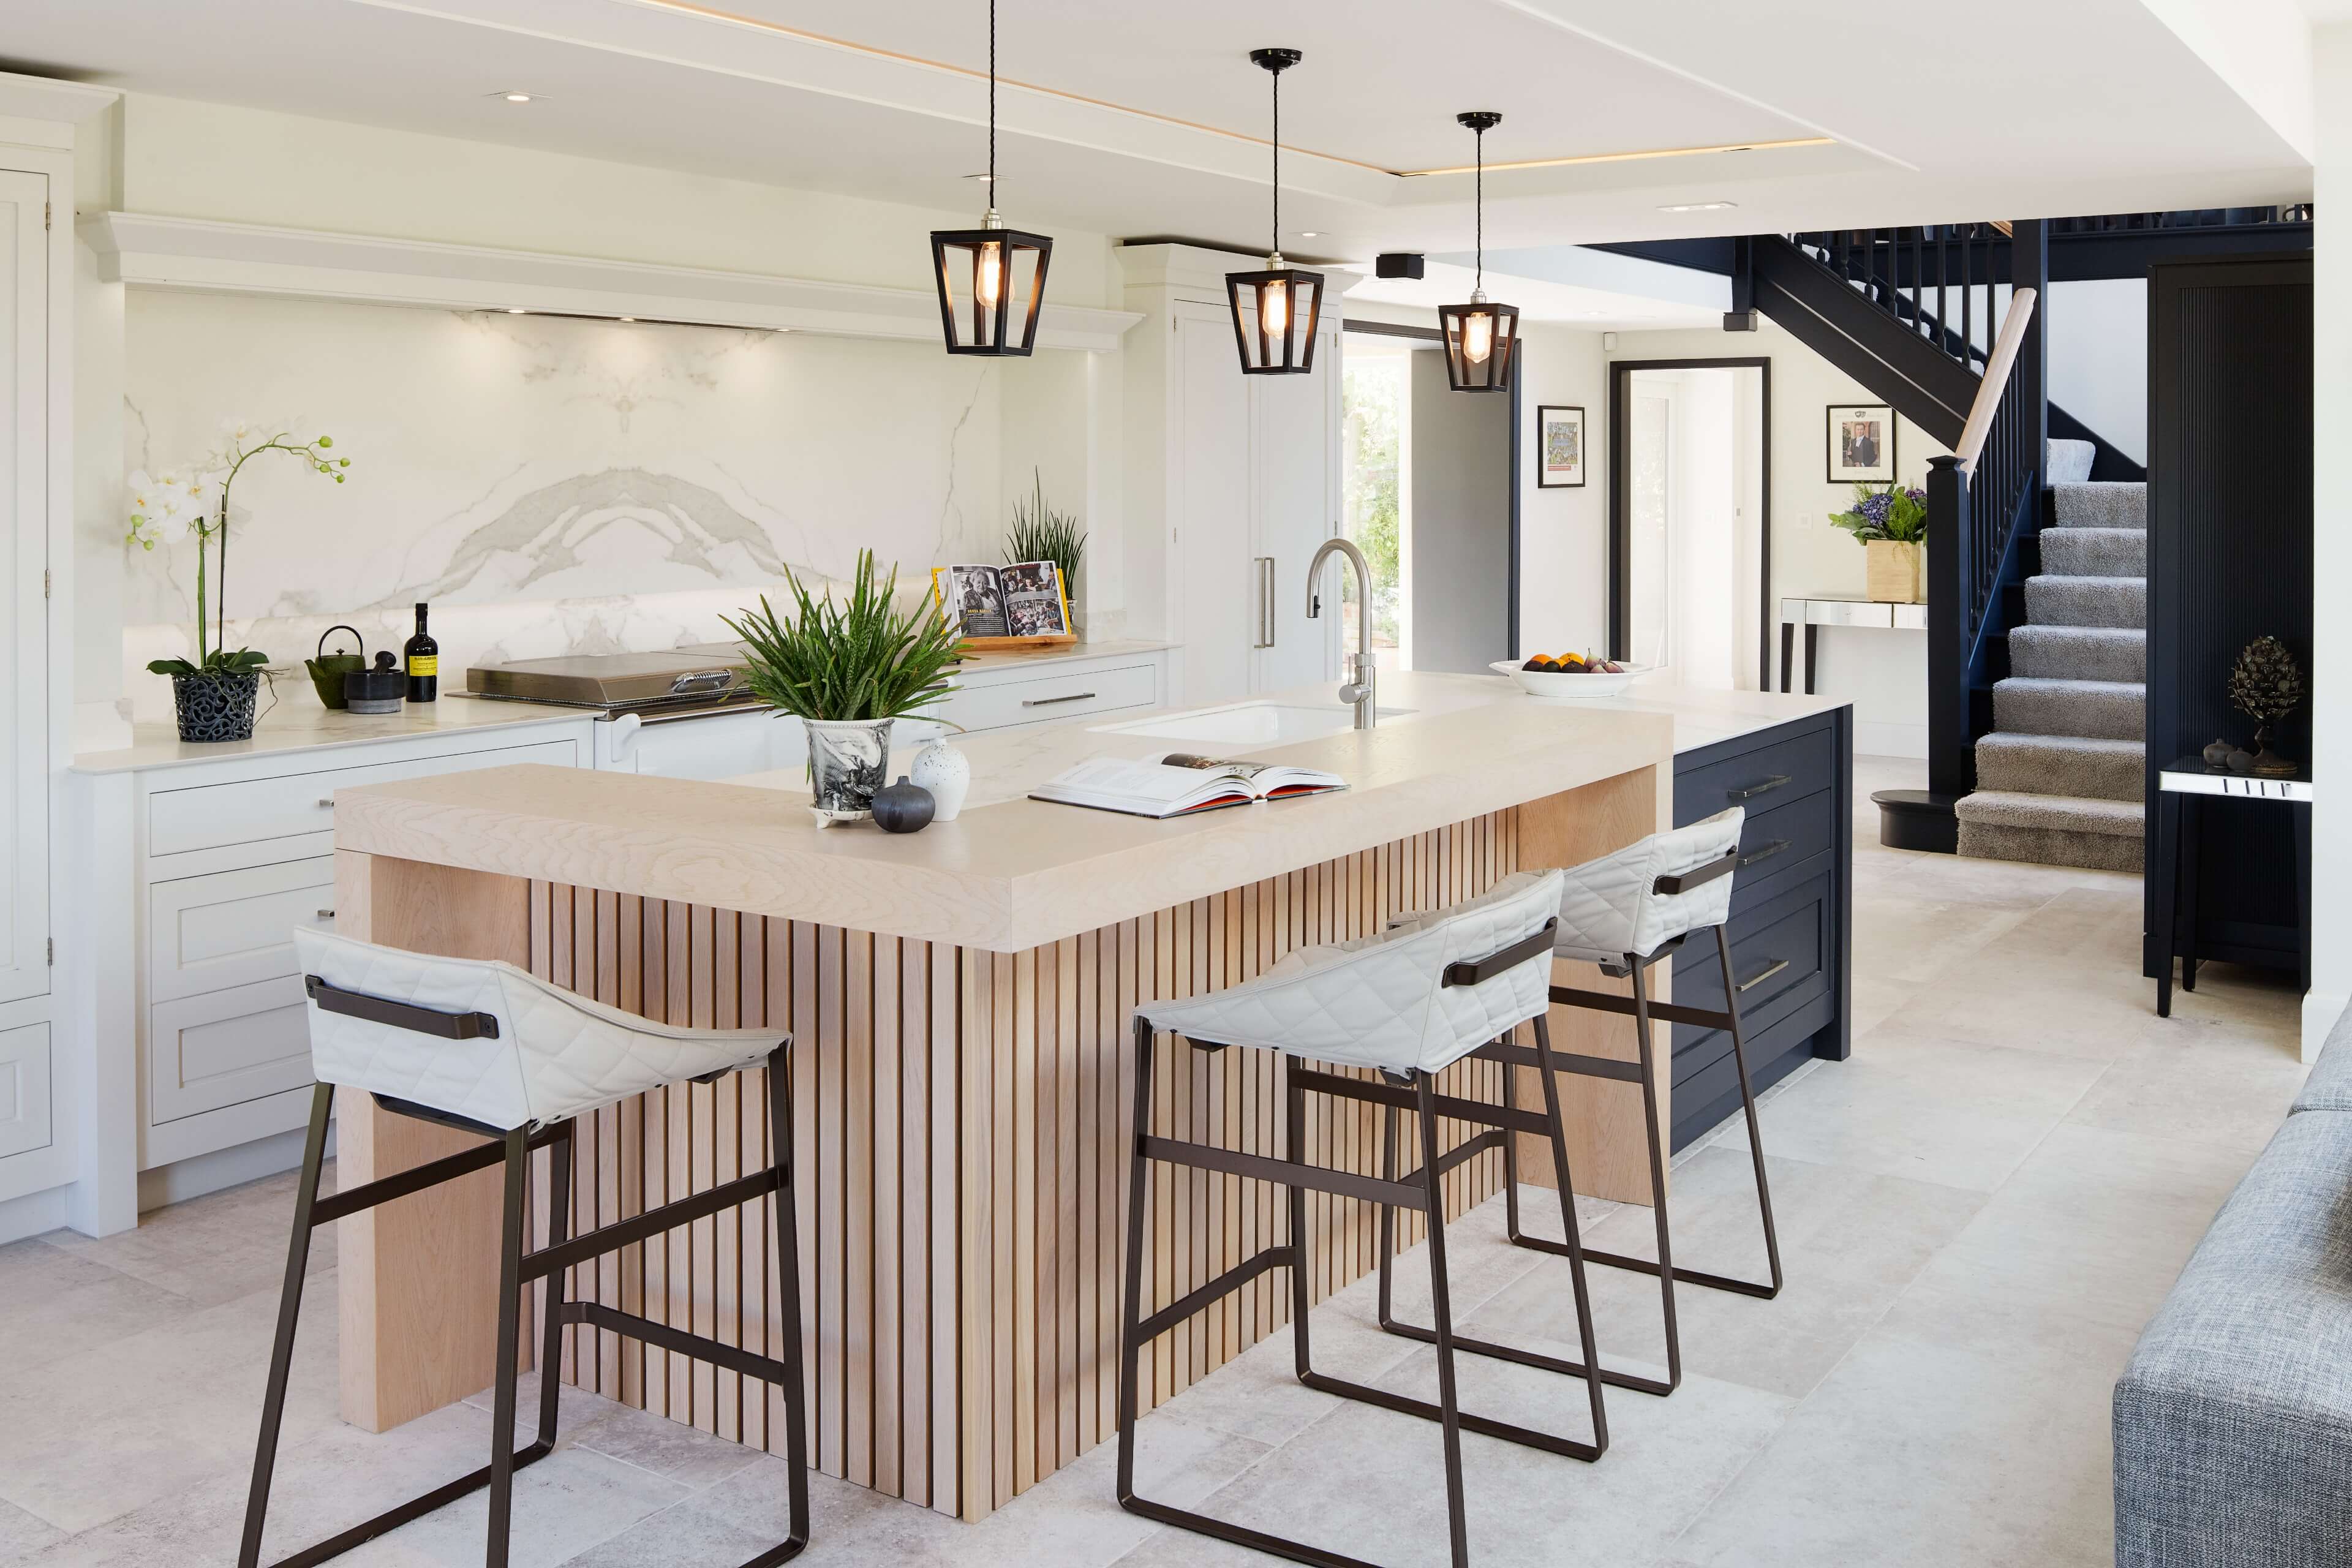 A contemporary style slatted oak fascia to the kitchen island and breakfast bar